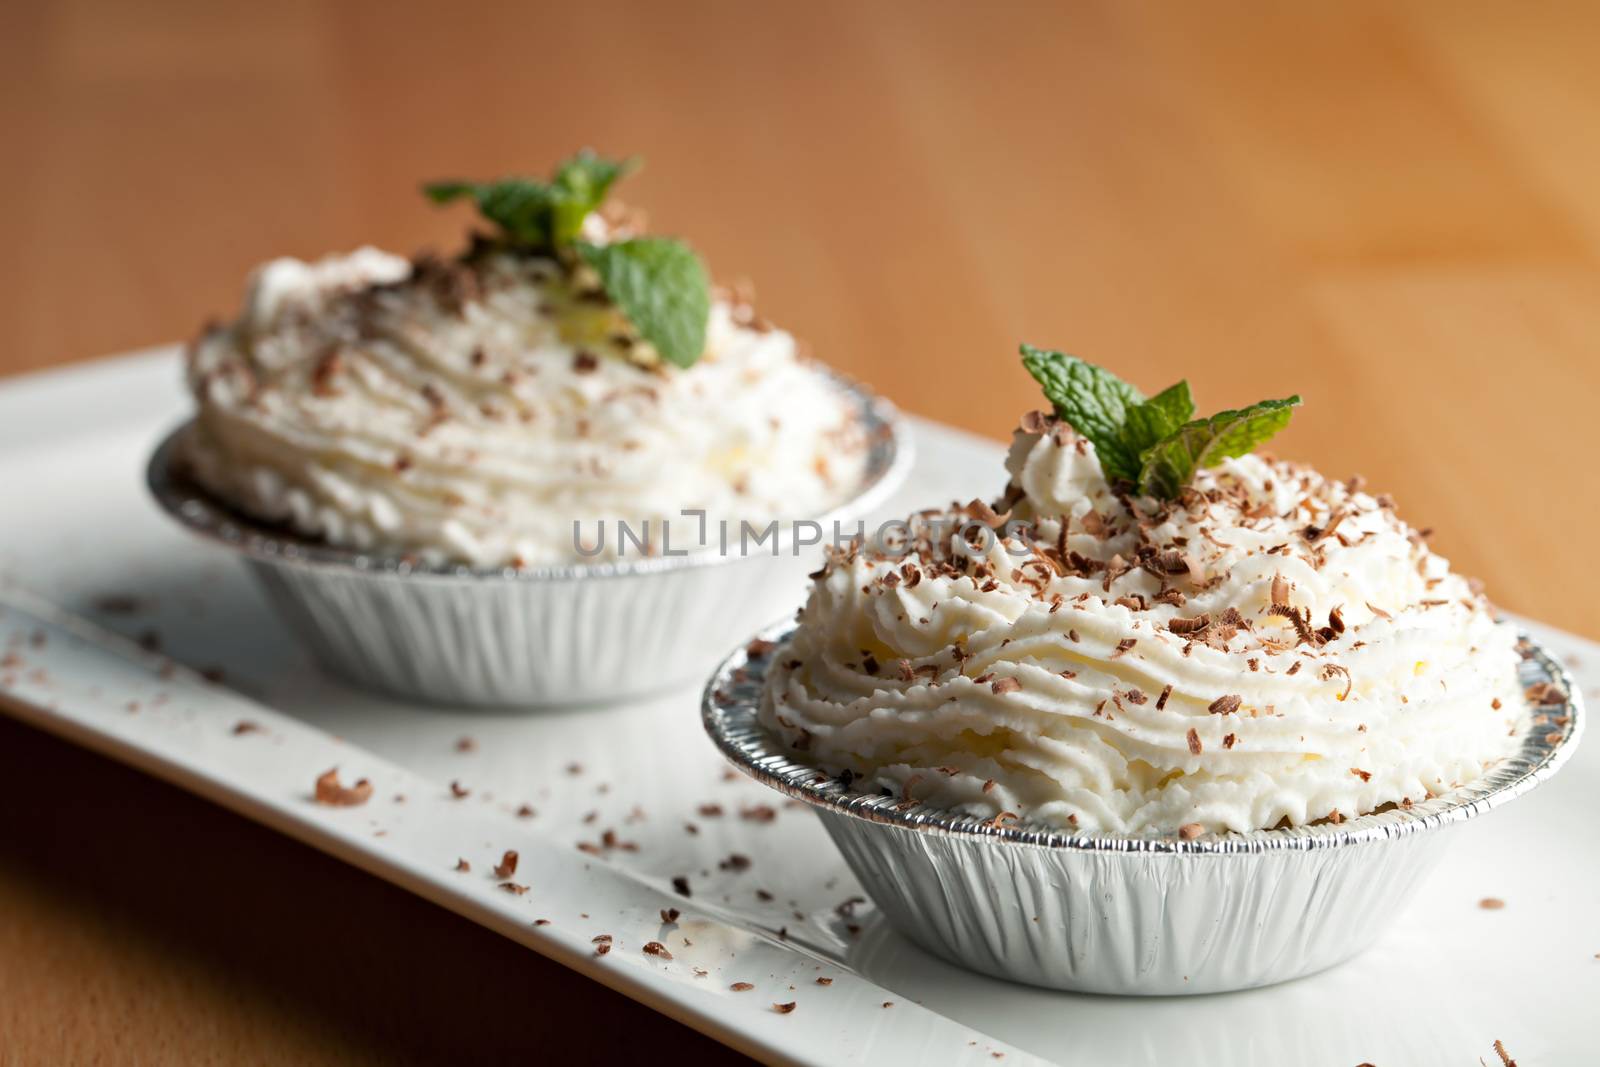 Parfait desserts with fresh whipped cream and chocolate shavings. Shallow depth of field.